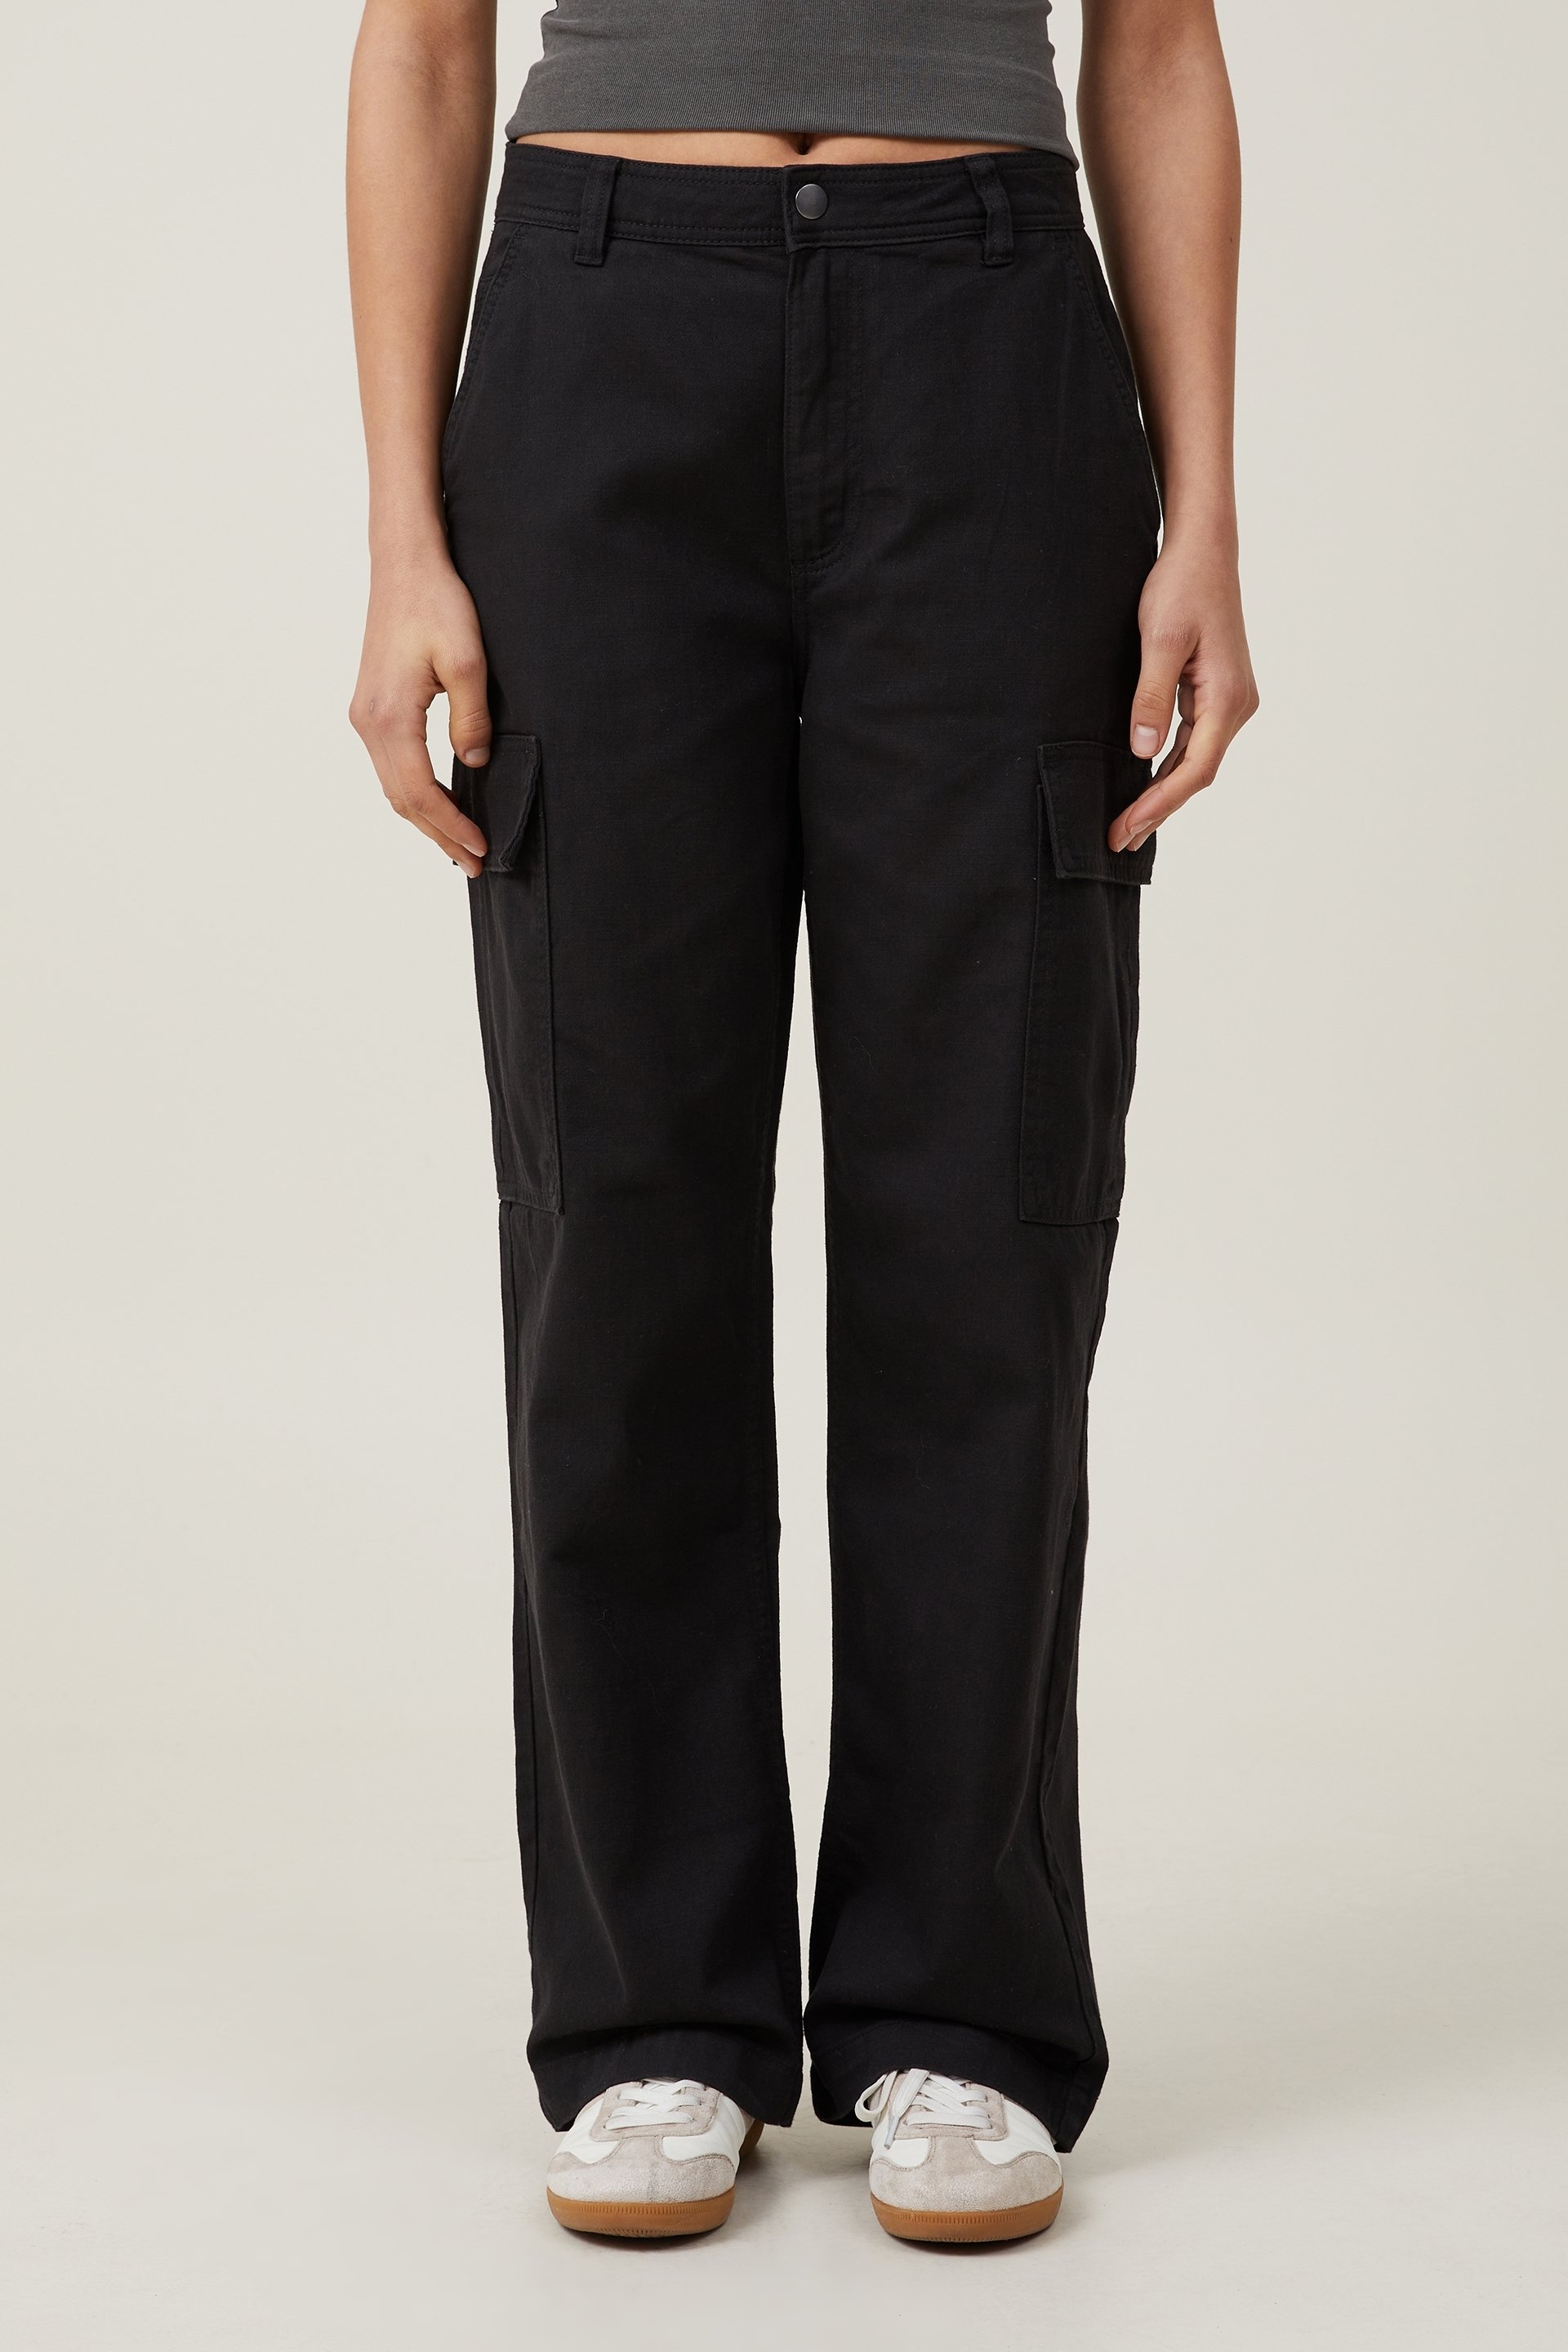 Cotton On cargo pants in black